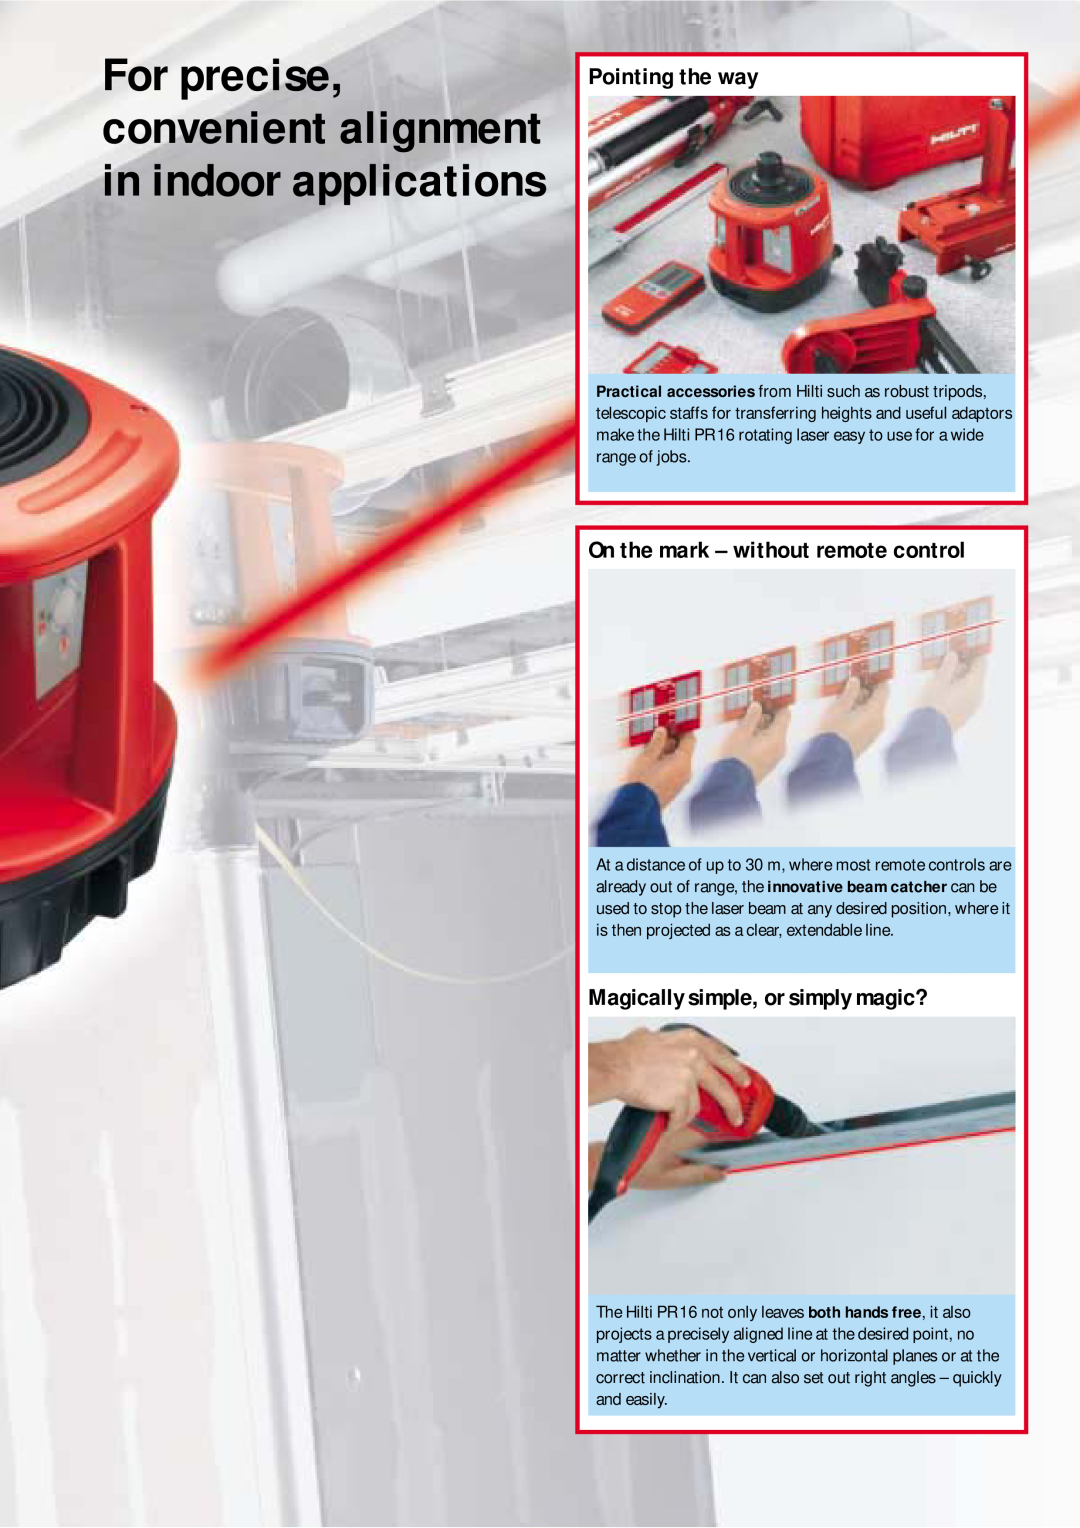 Hilti PR 16 manual Pointing the way, On the mark - without remote control, Magically simple, or simply magic? 